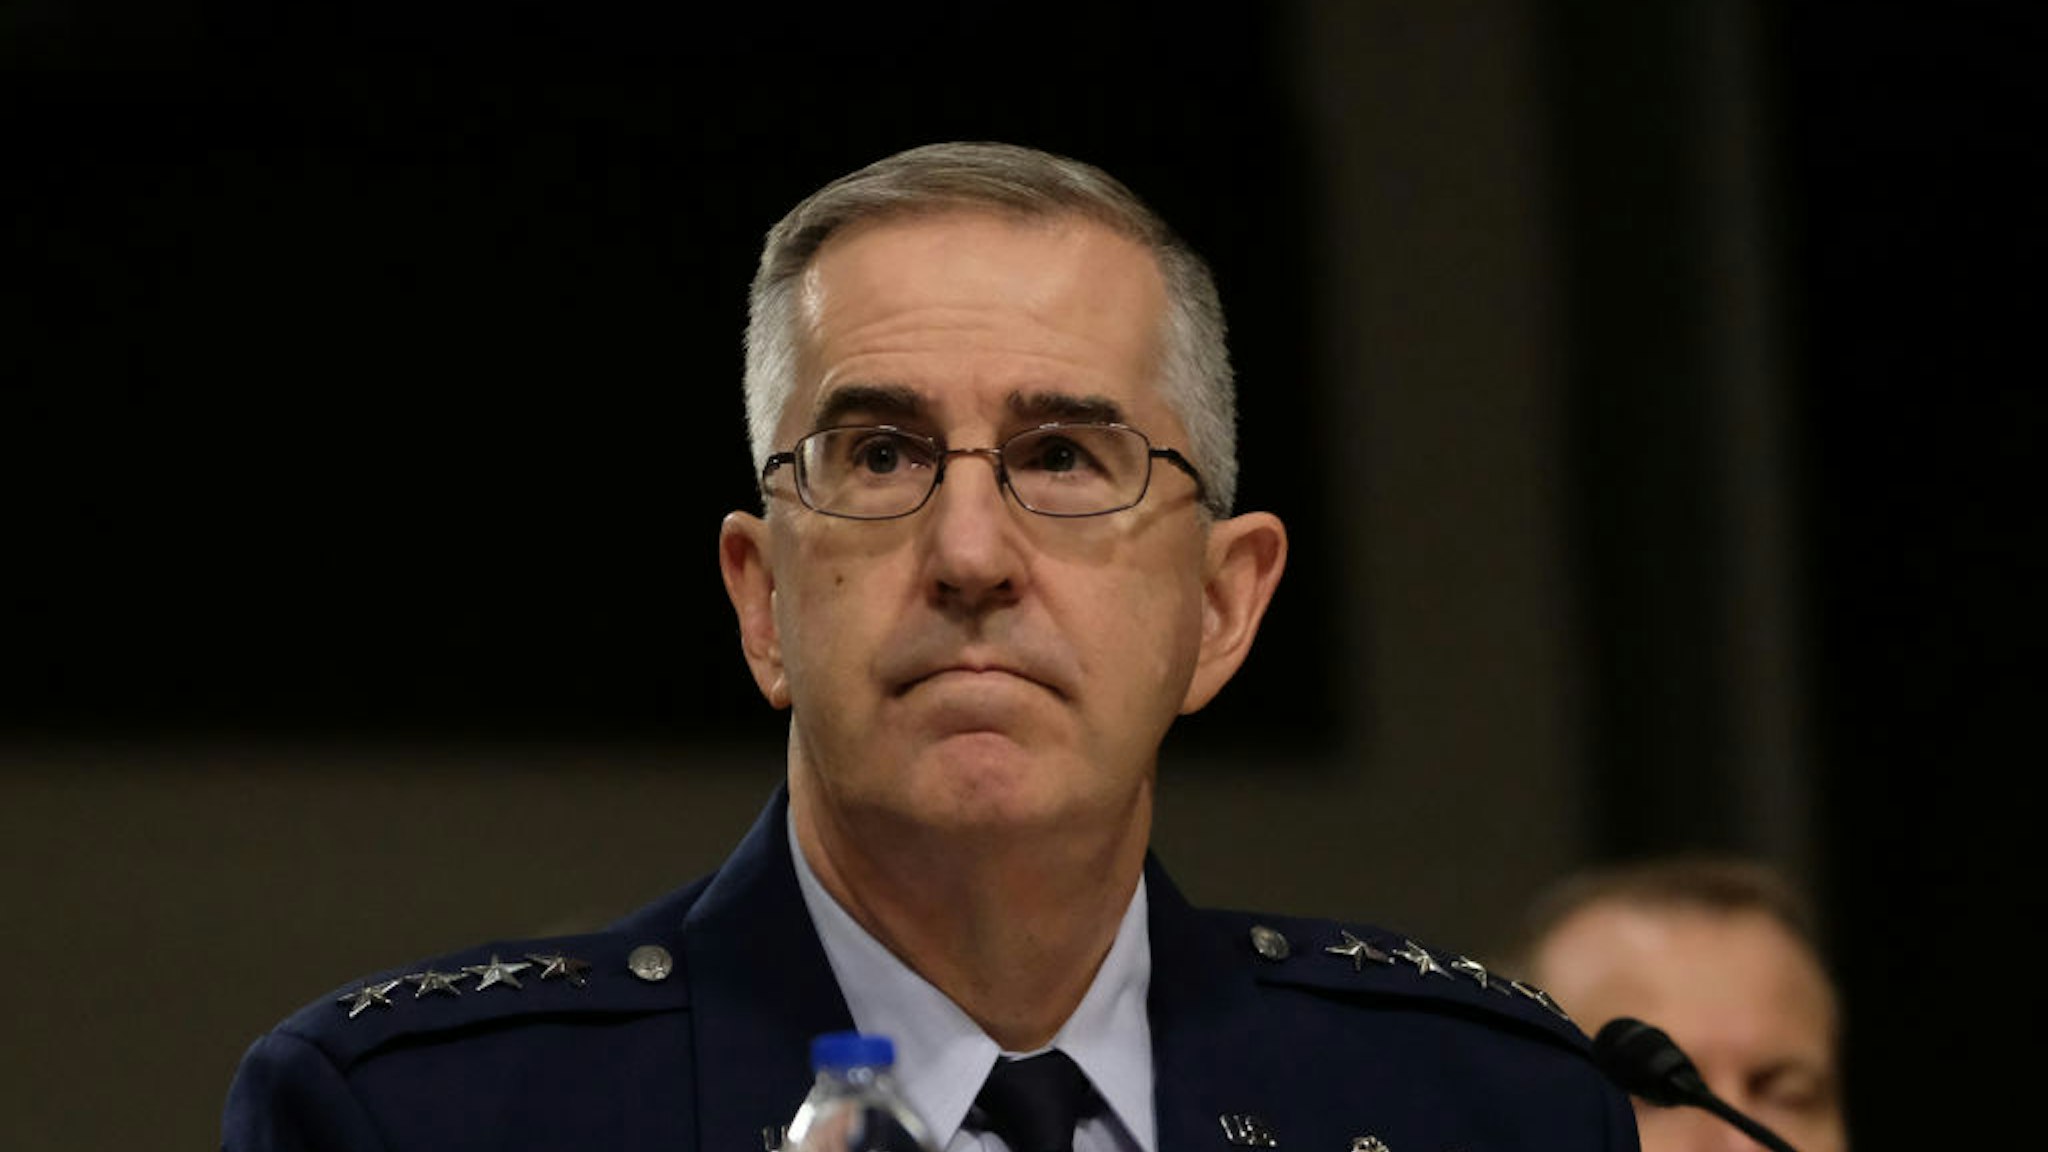 Air Force Gen. John E. Hyten listens during a Senate Armed Services Committee hearing on April 11, 2019 in Washington, DC.